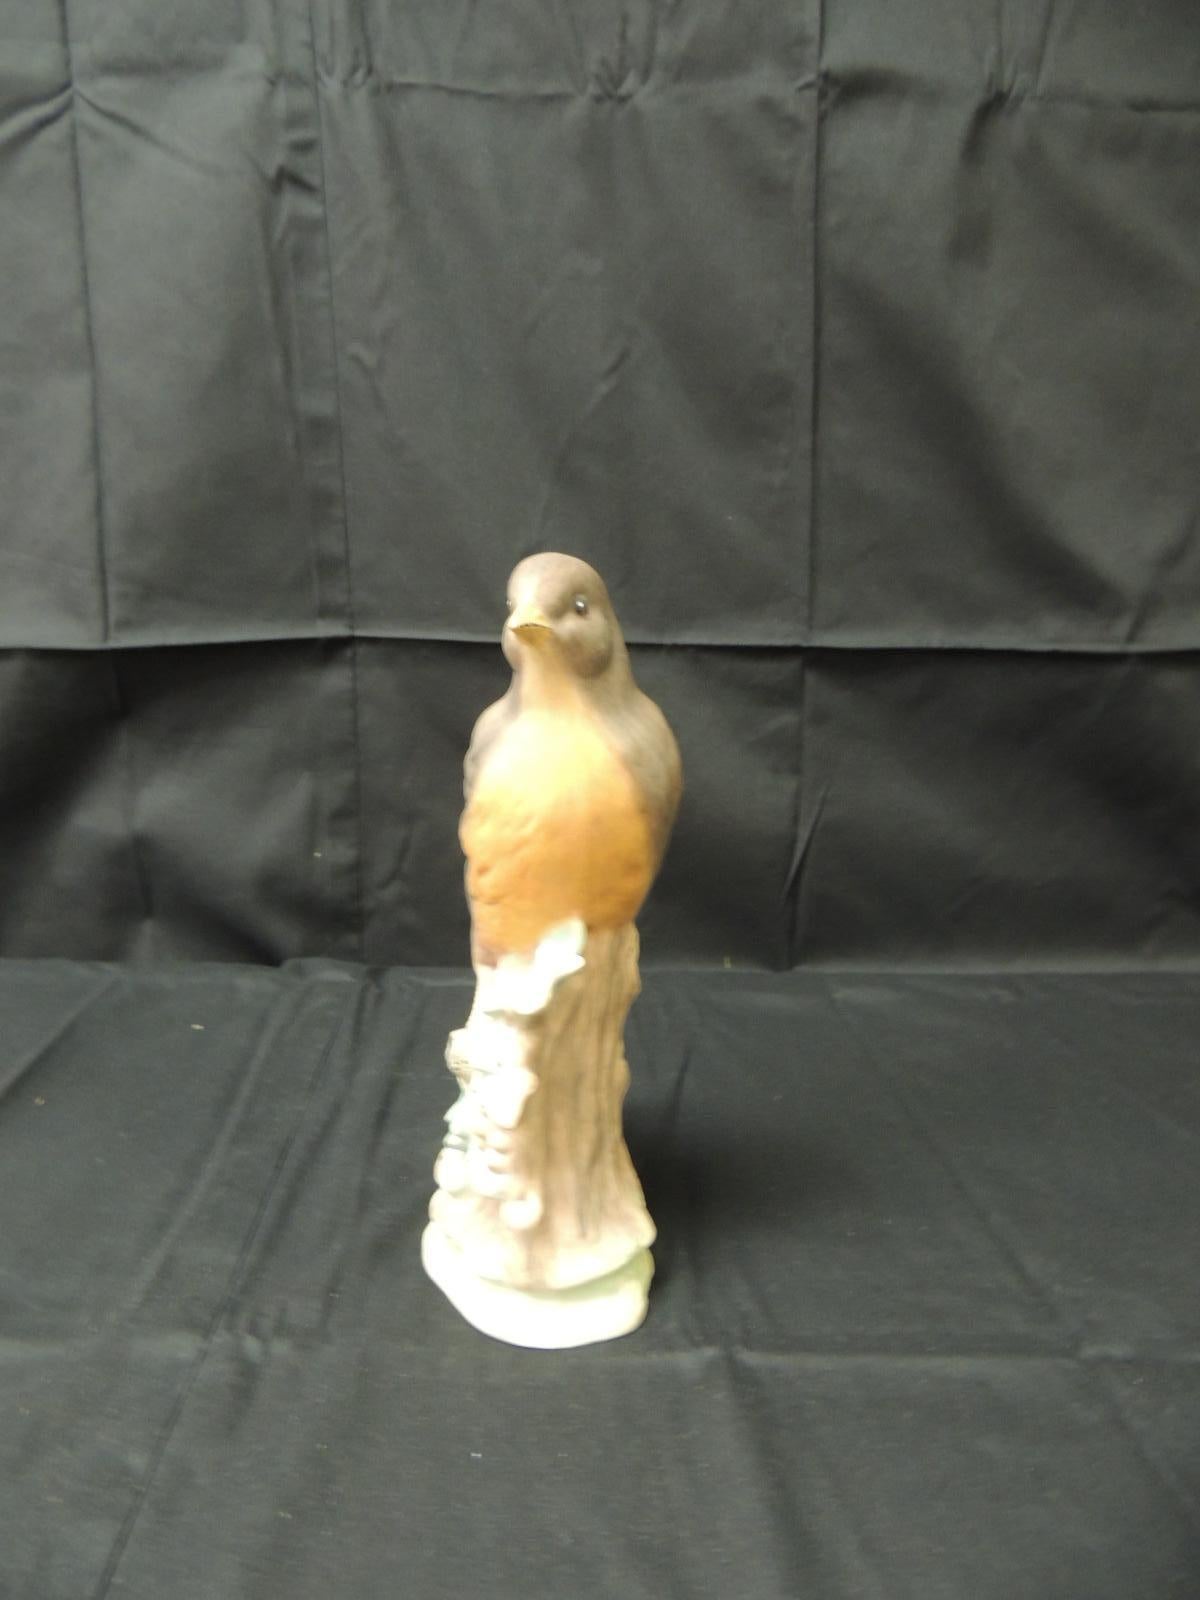 Vintage hand painted song bird bisque porcelain figurine on tree trunk.
Brown bird with orange chest feathers.
Size: 9